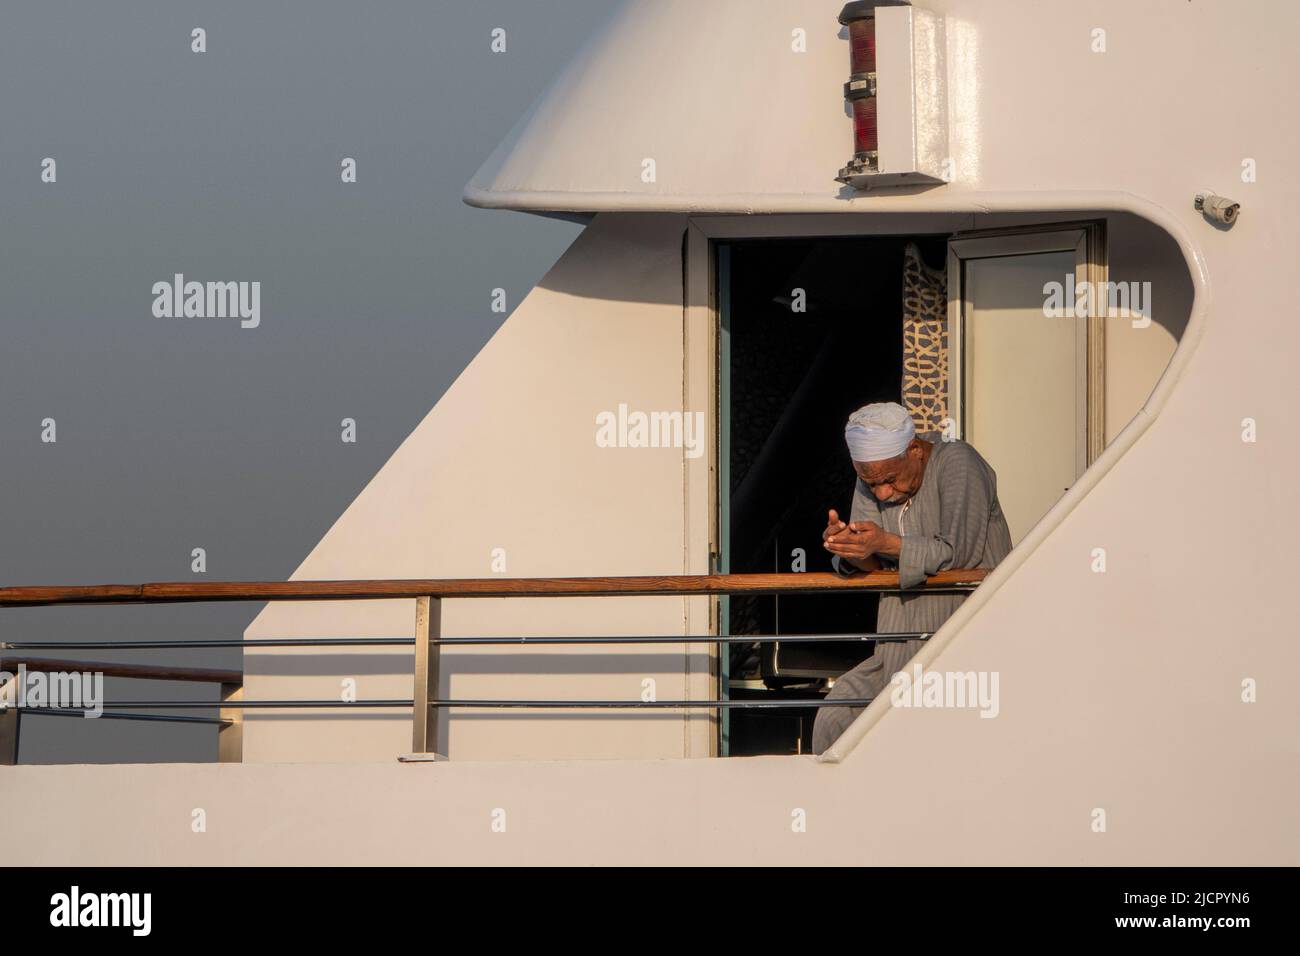 Nile boat captain takes time out for contemplation leaning on cruise boat handrail Stock Photo